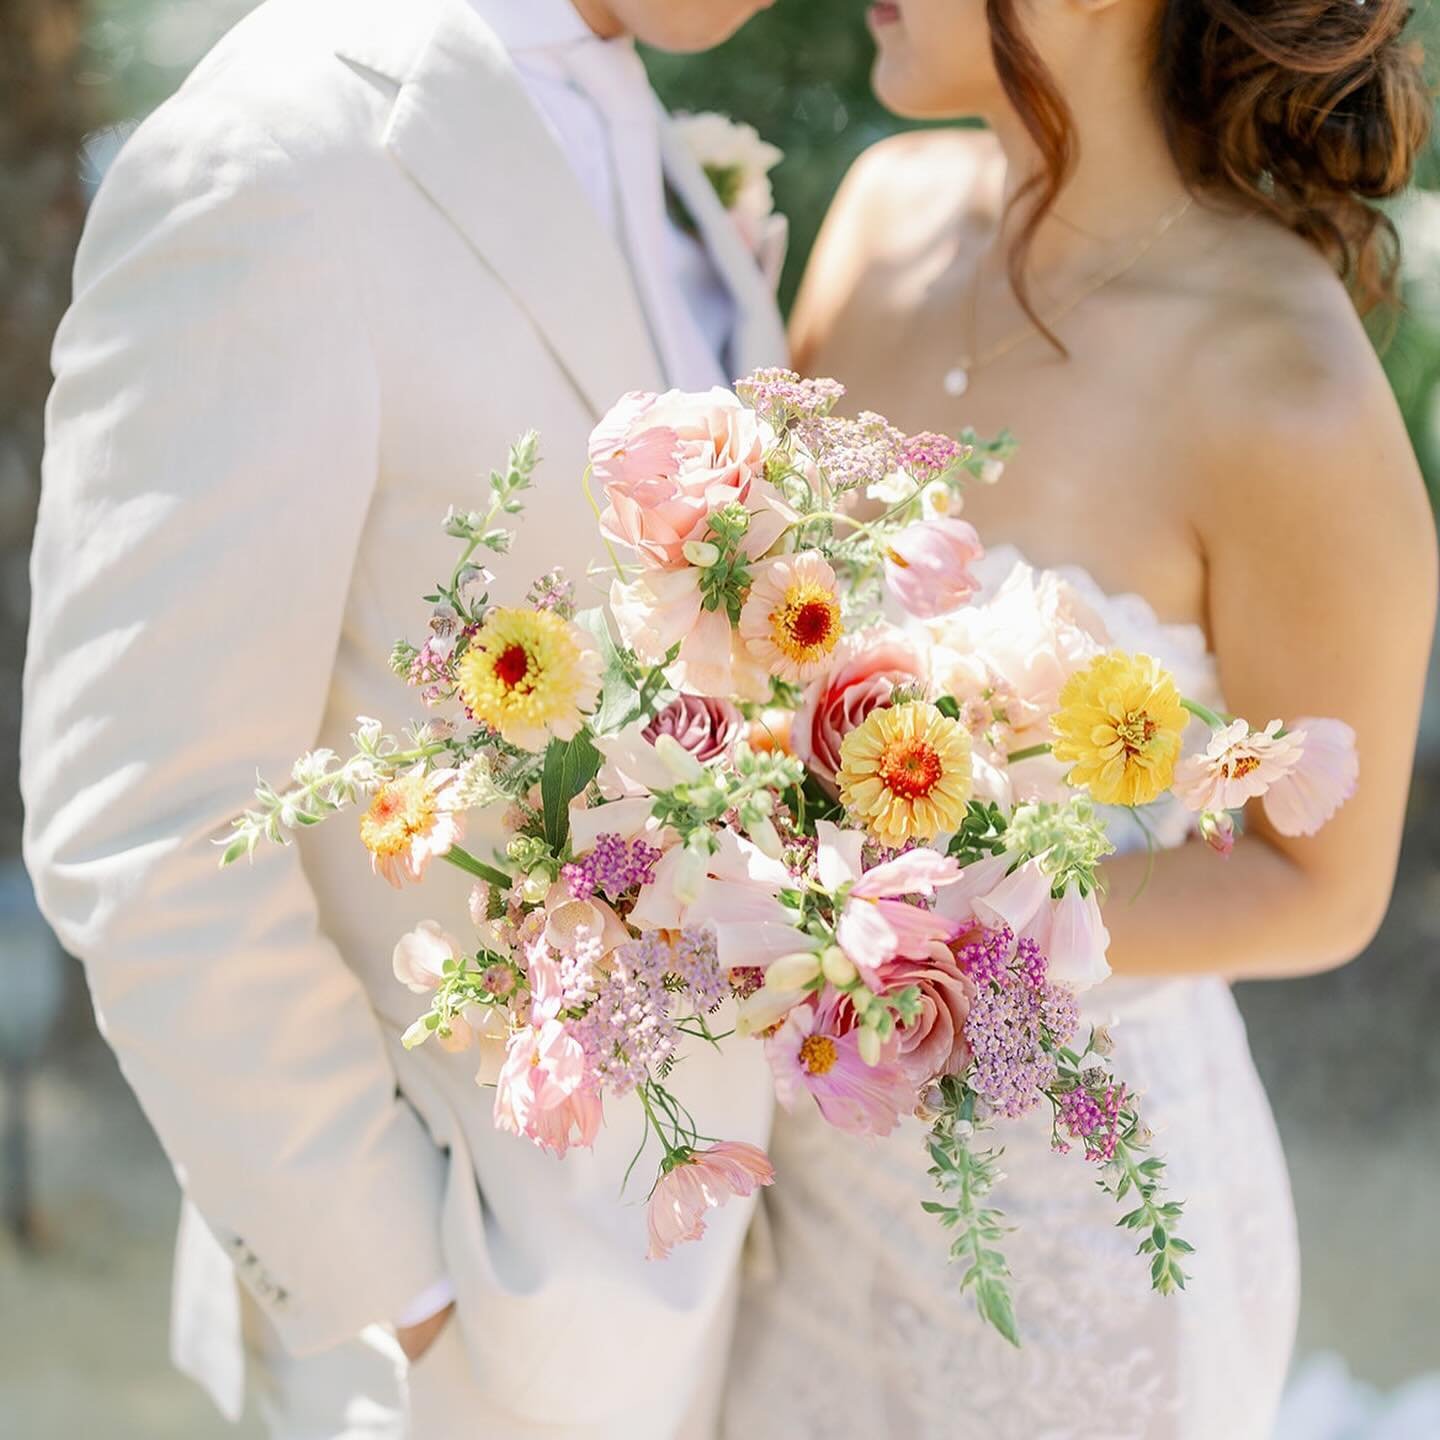 We are excited to see beautiful  pops of color this year like this vibrant color palette!🌸
.
Coordination | @simplylovely_events 
Photographer | @honeyandlight.studio 
Florals | @thebloombarco 
Hair &amp; Makeup | @elena_little 
Venue | @nellaterra